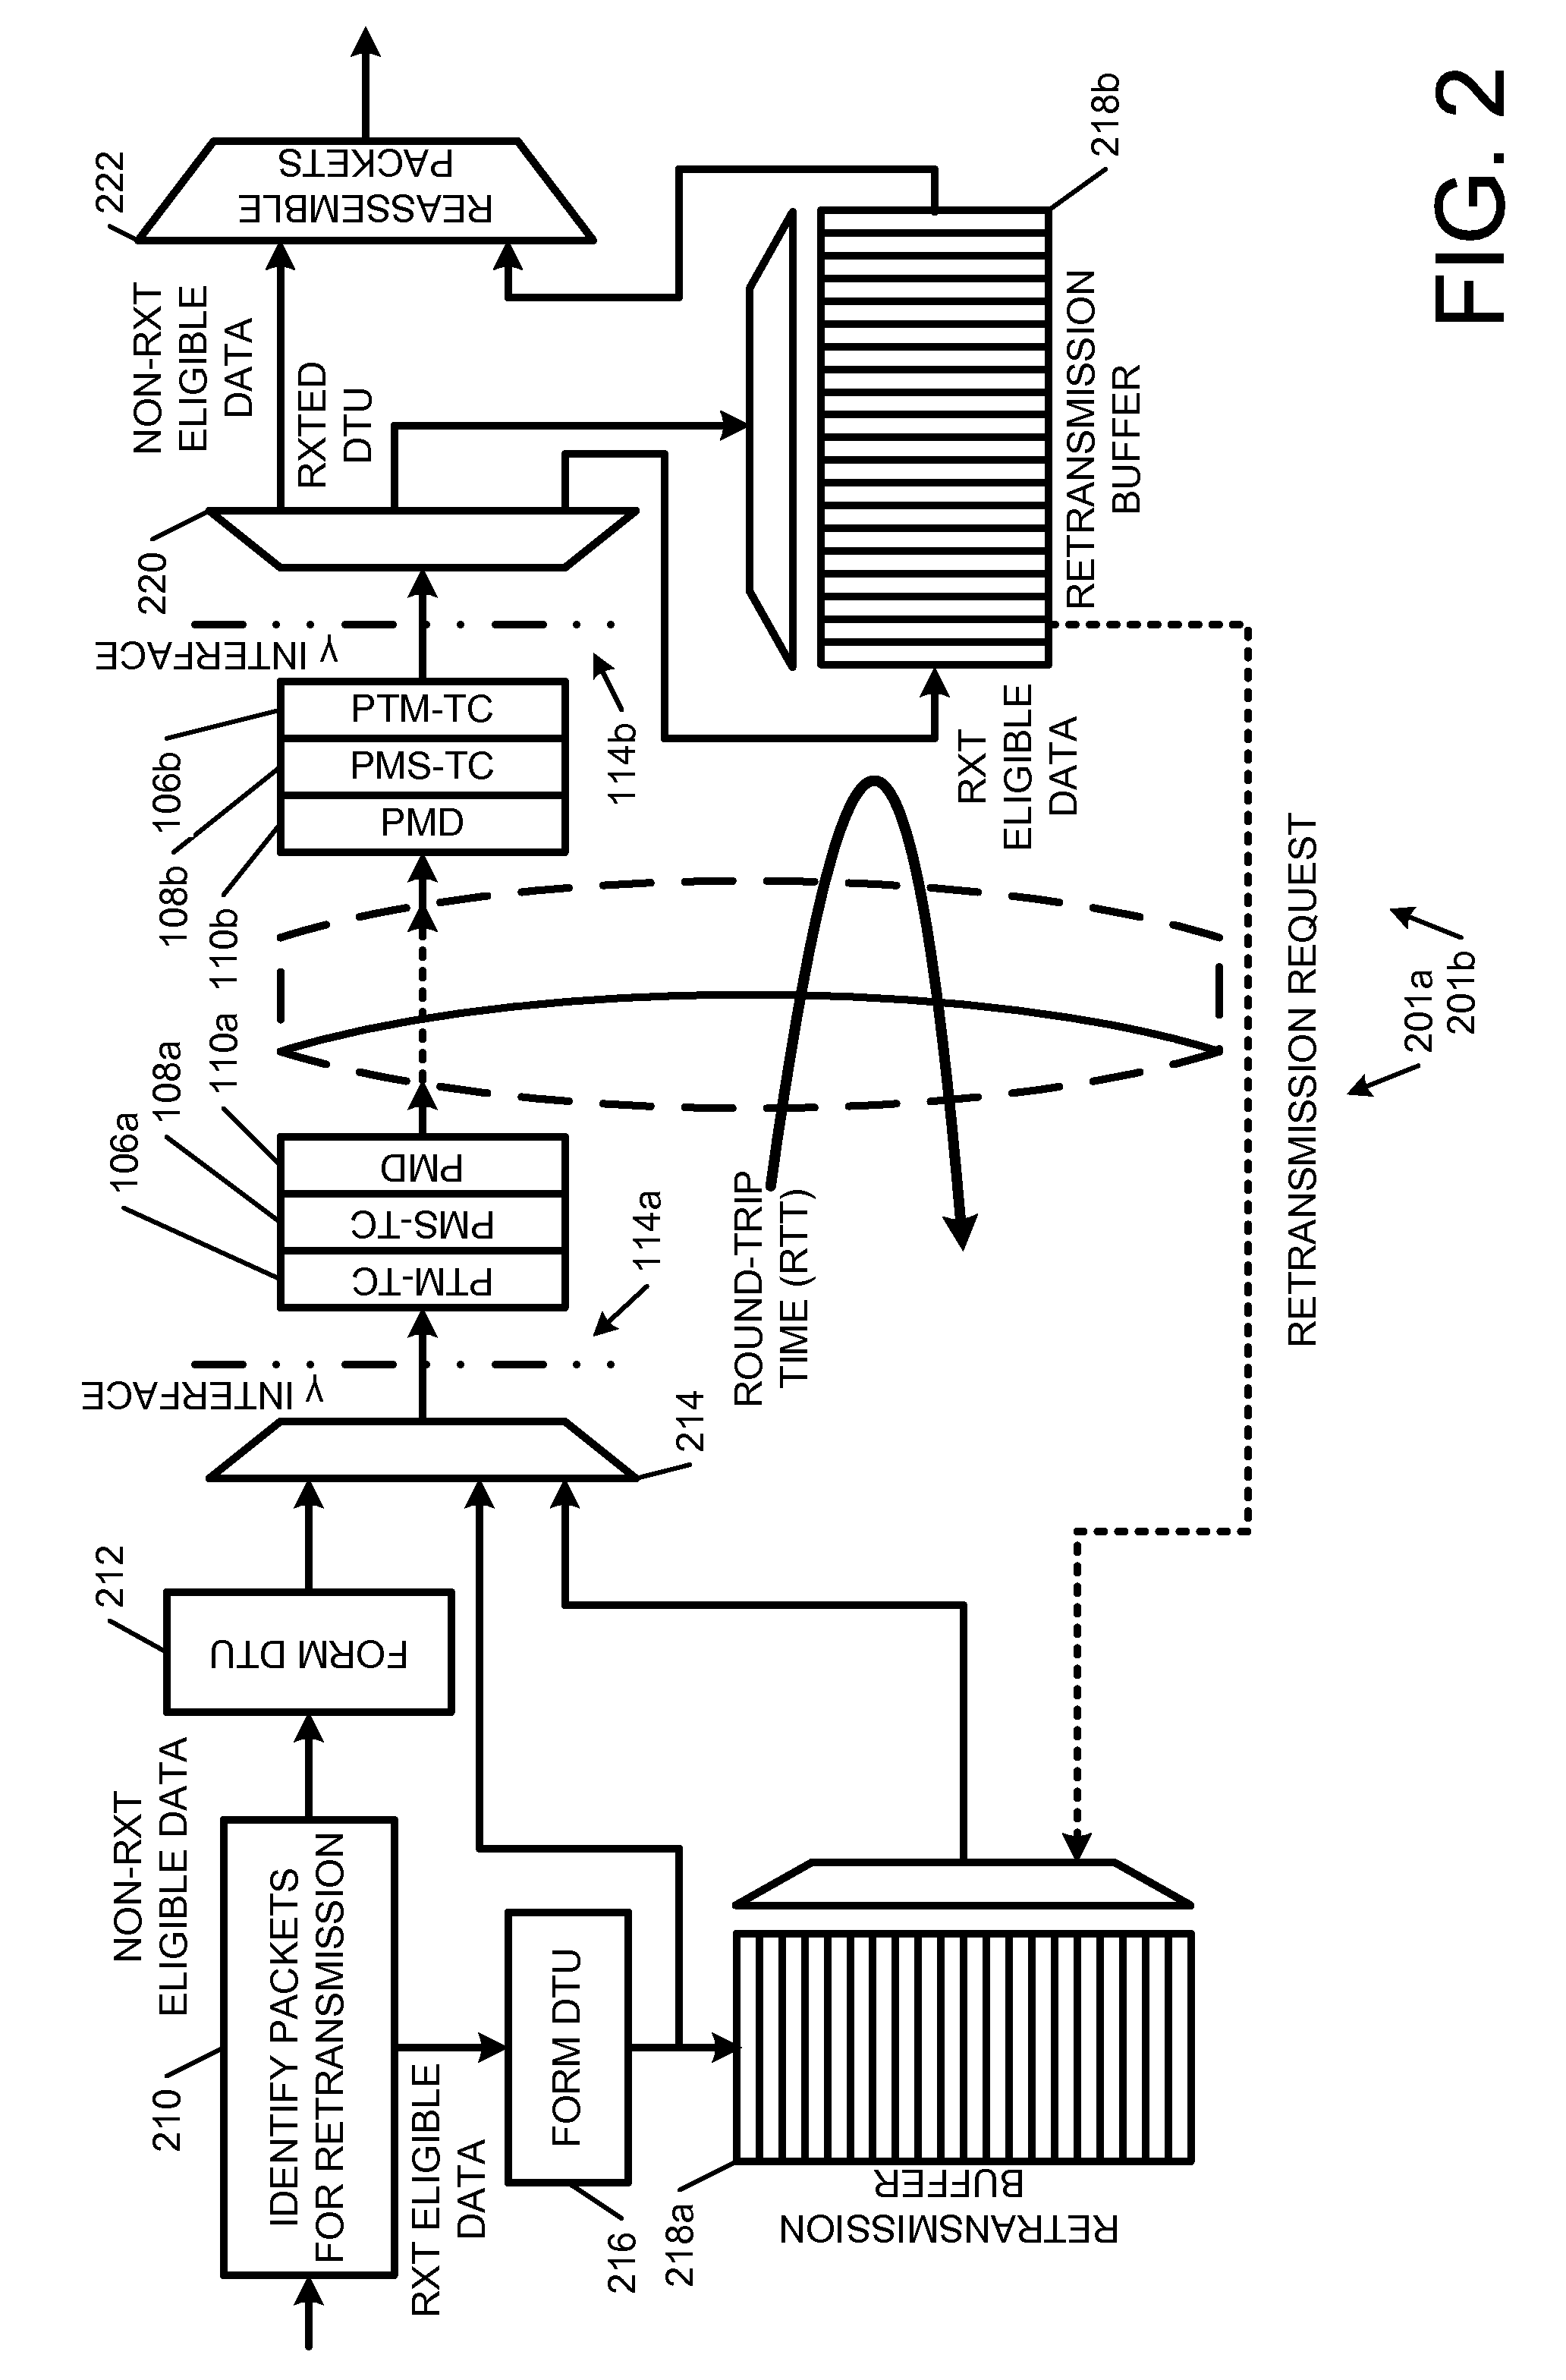 Retransmission above the gamma interface